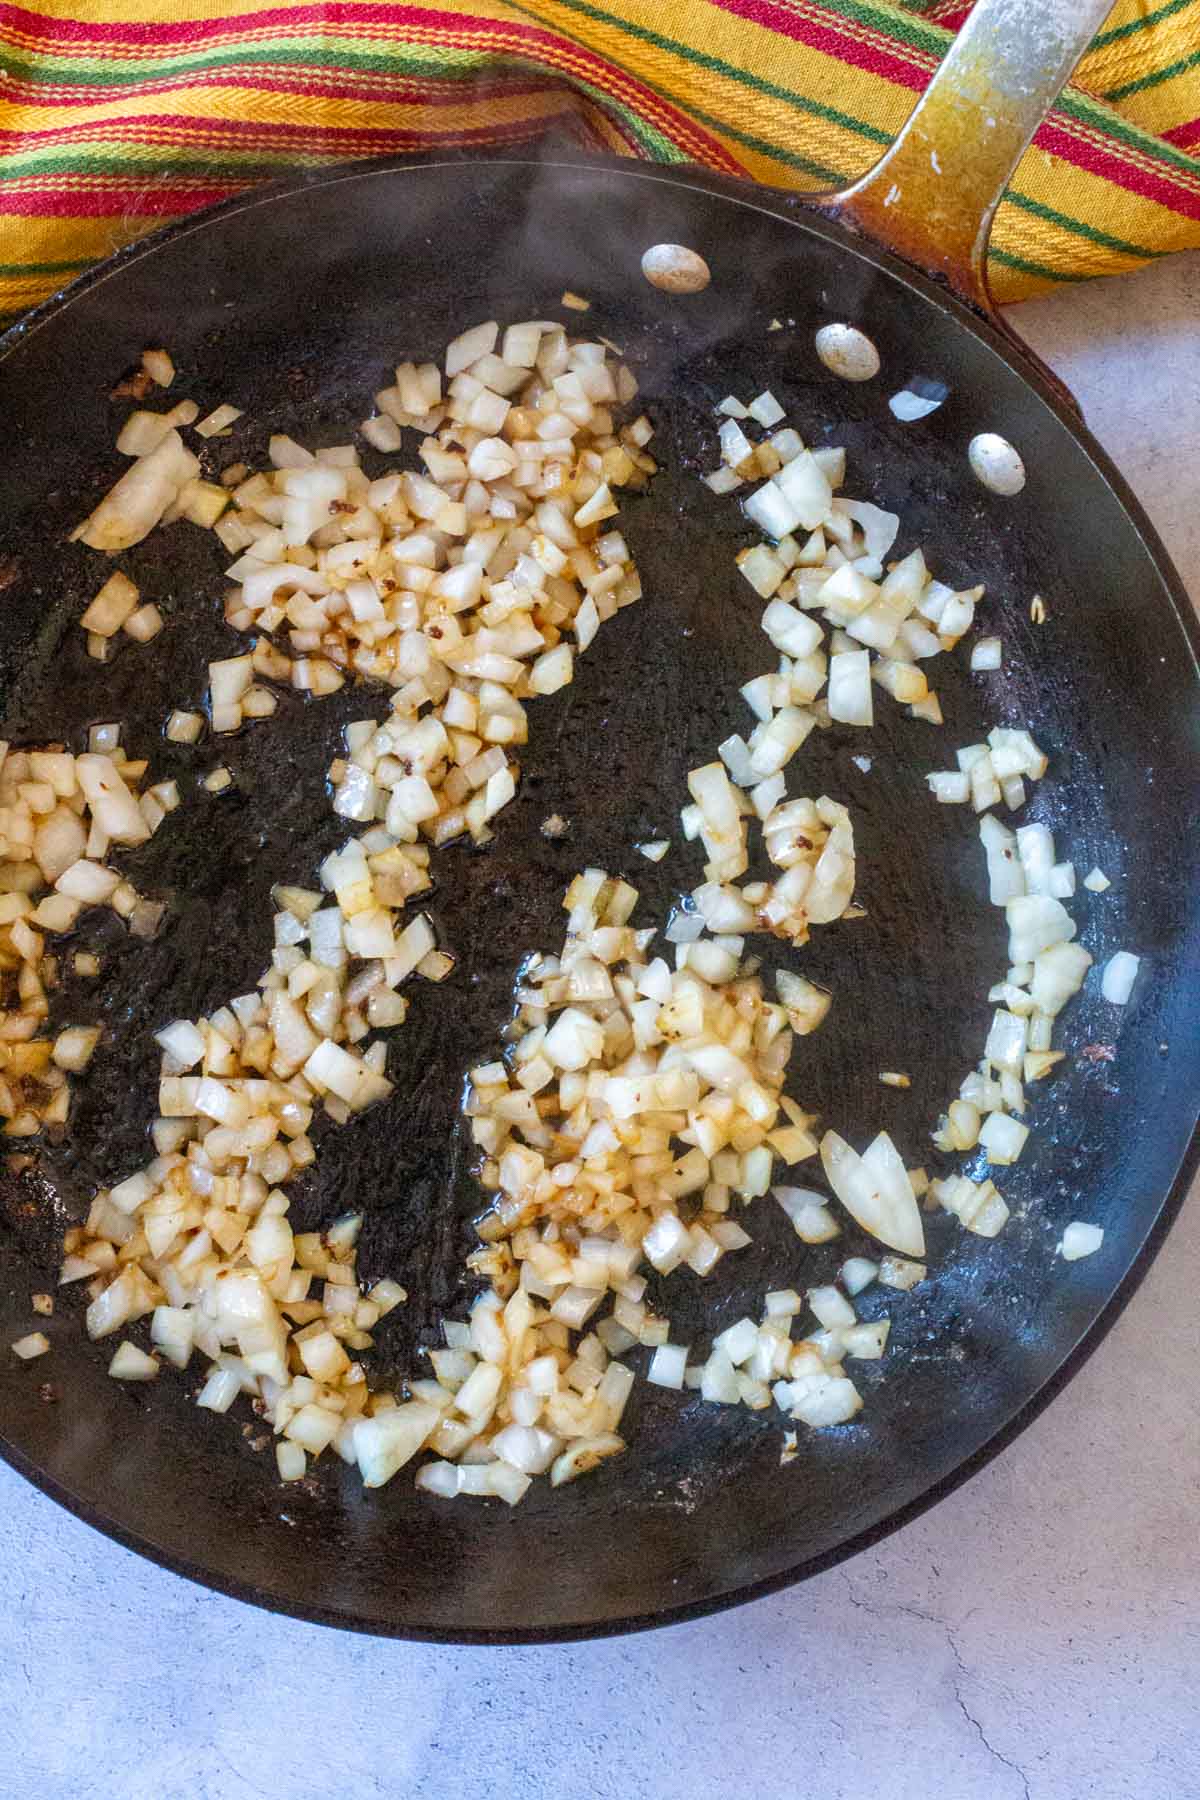 Browning chopped onions in a large black skillet.